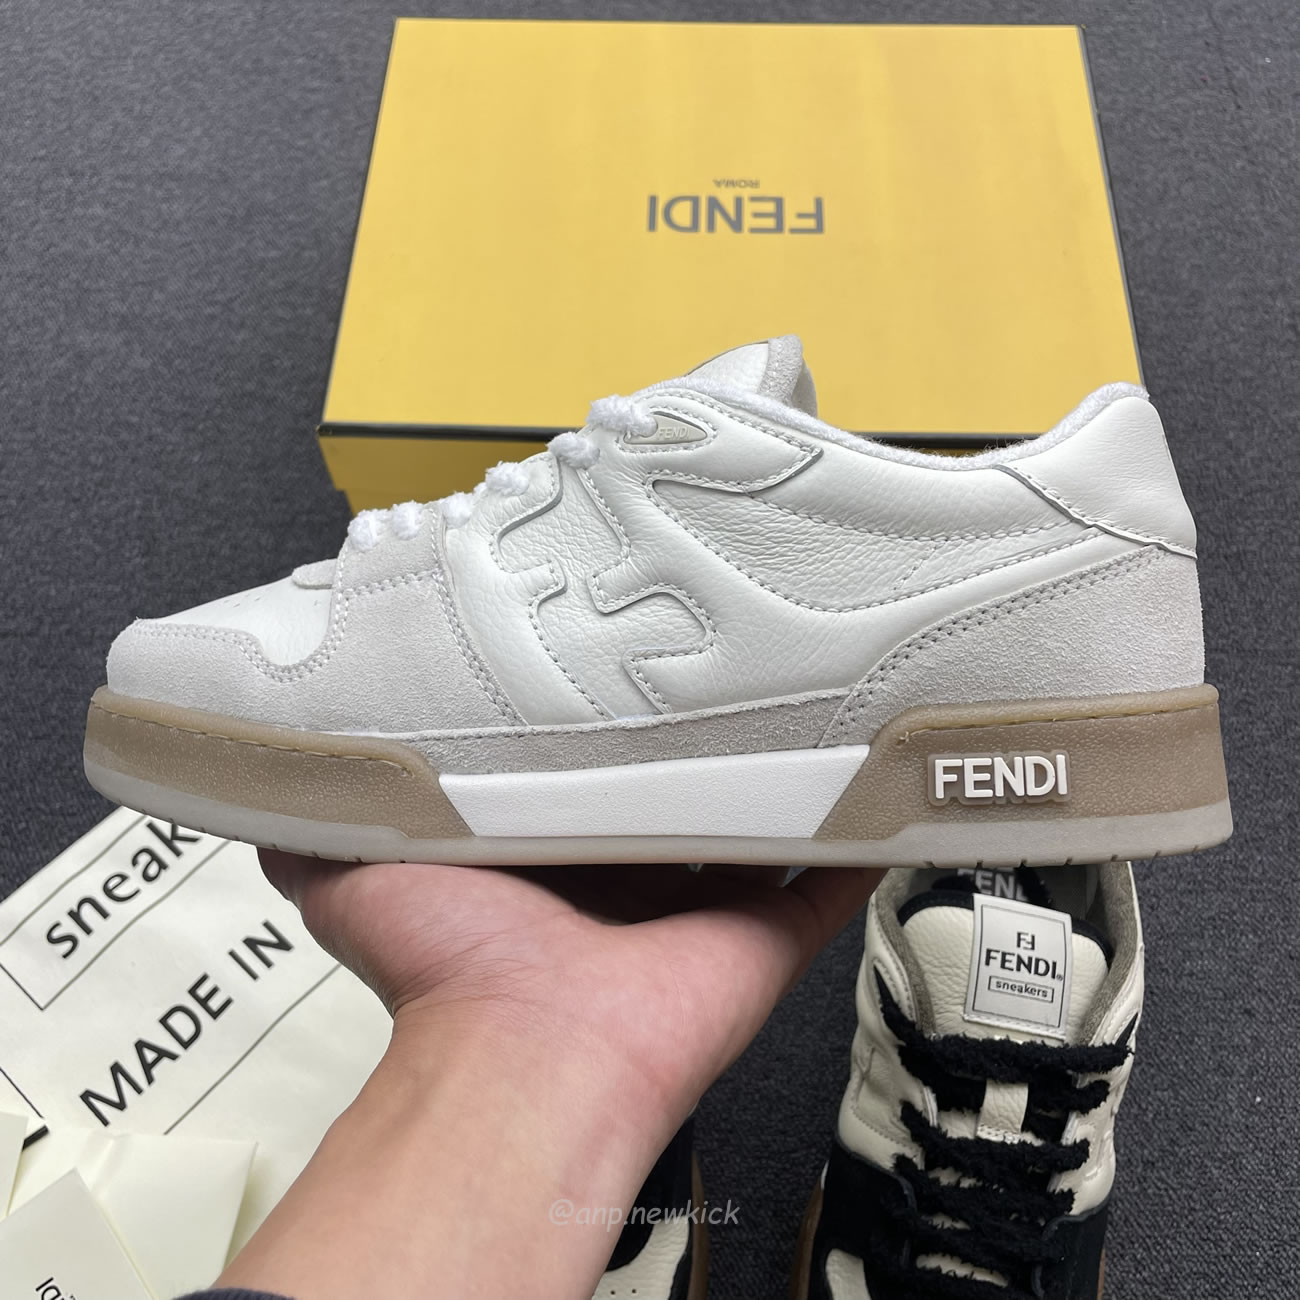 Fendi Match Cream Black White Suede And Leather Low Top Sneakers (11) - newkick.org